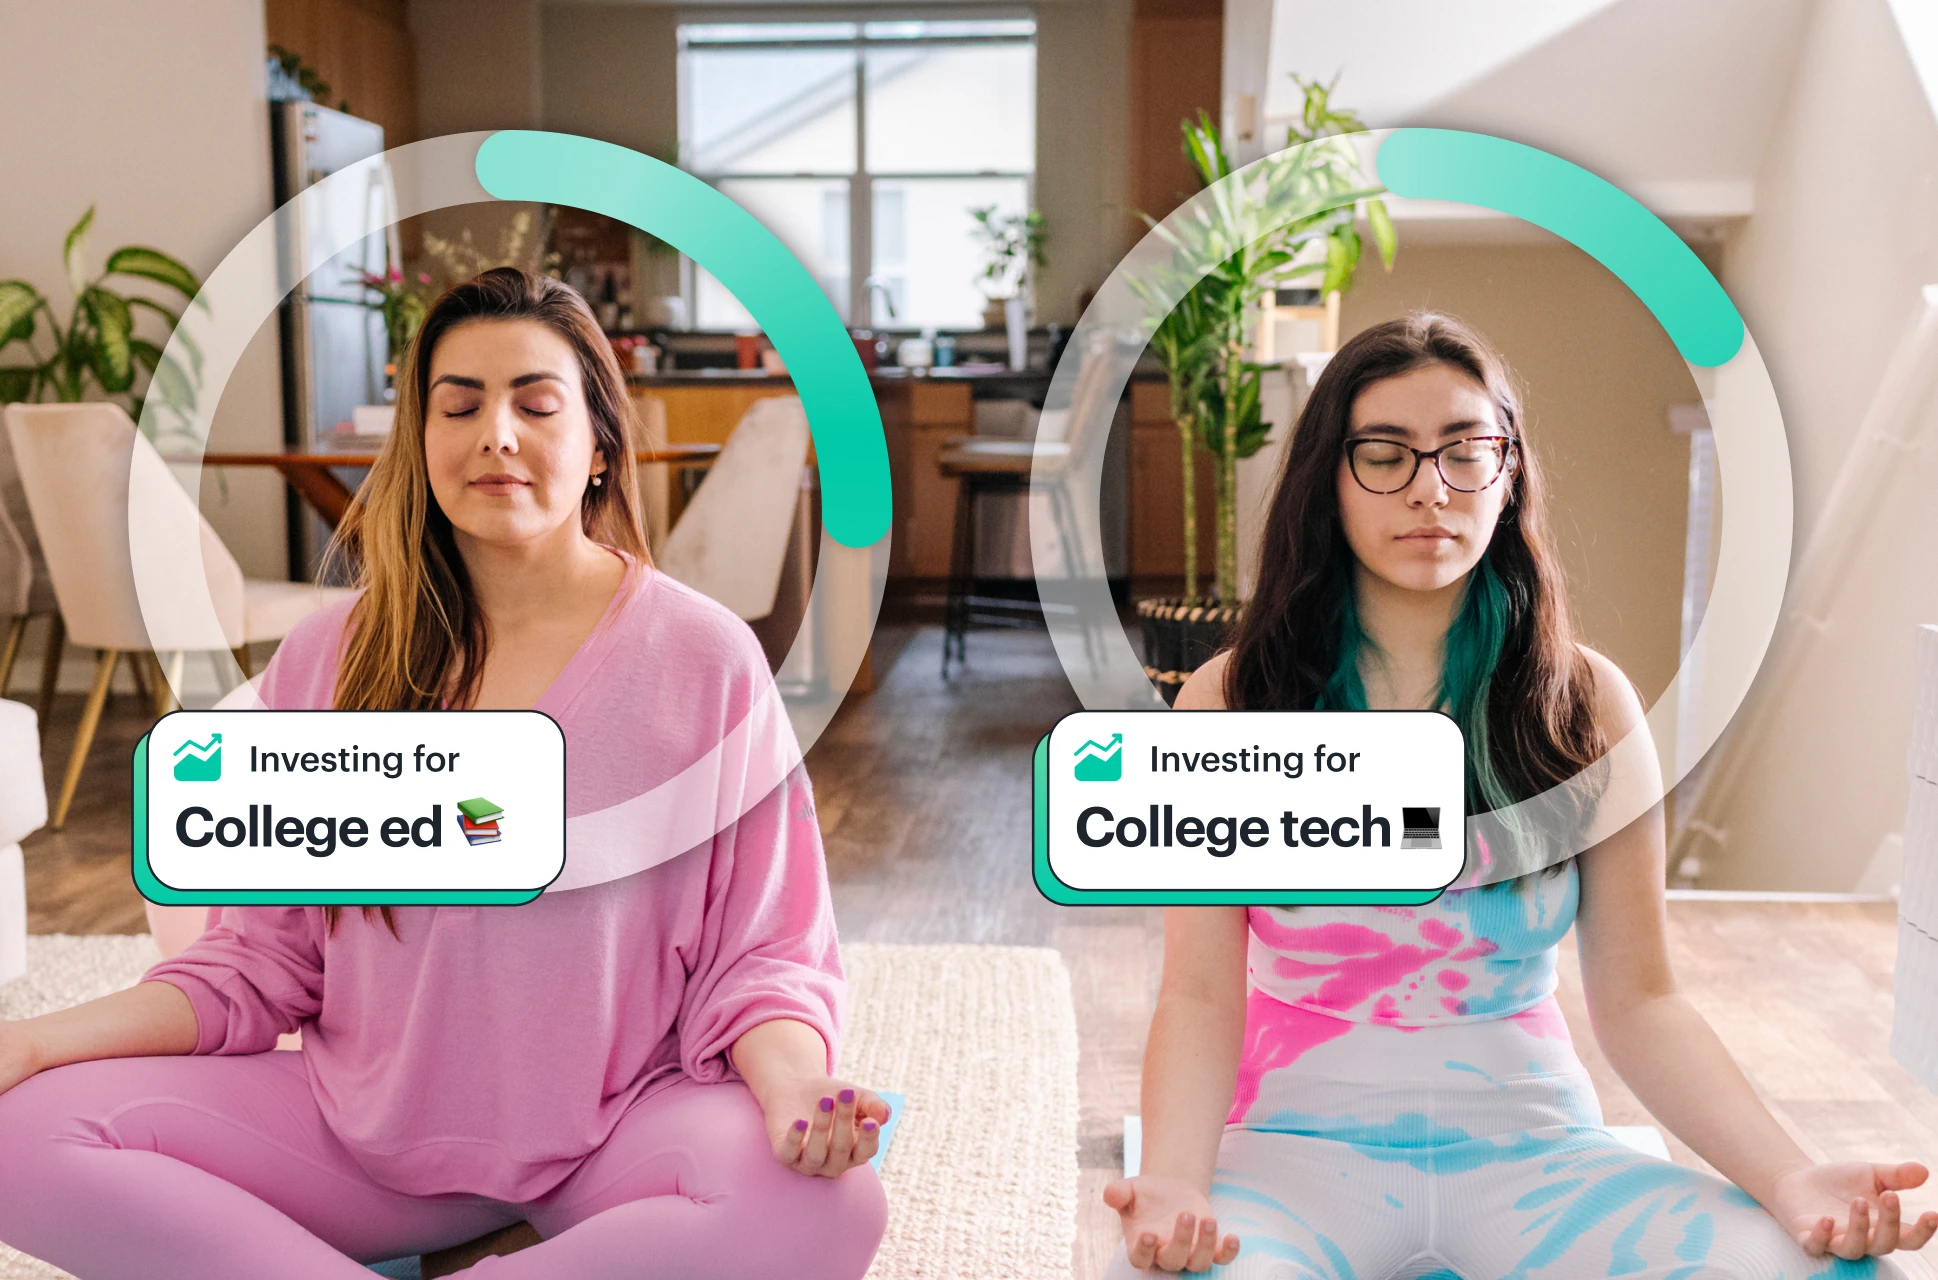 Mom and teen doing yoga together indoors while investing for college with their Greenlight apps